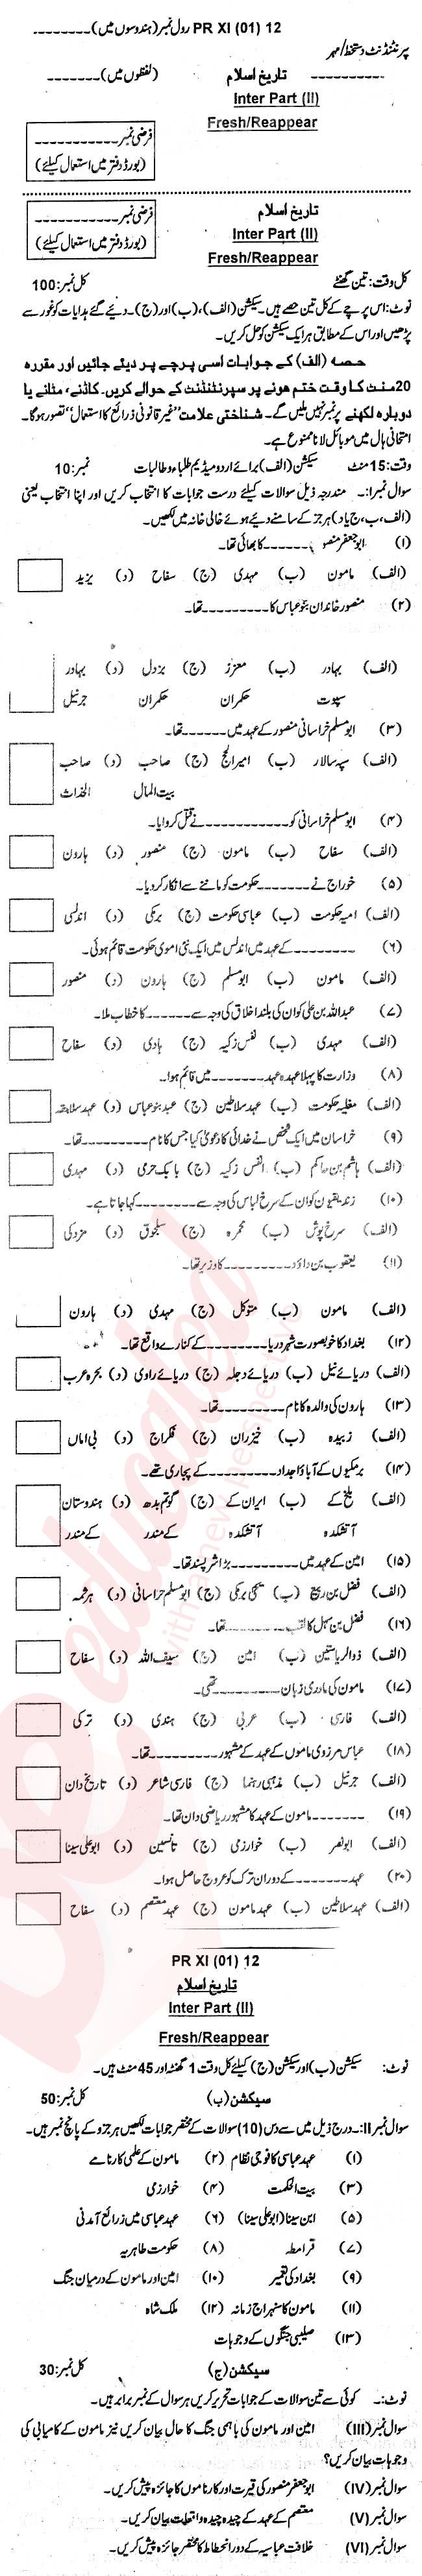 Islamic History FA Part 2 Past Paper Group 1 BISE Swat 2012